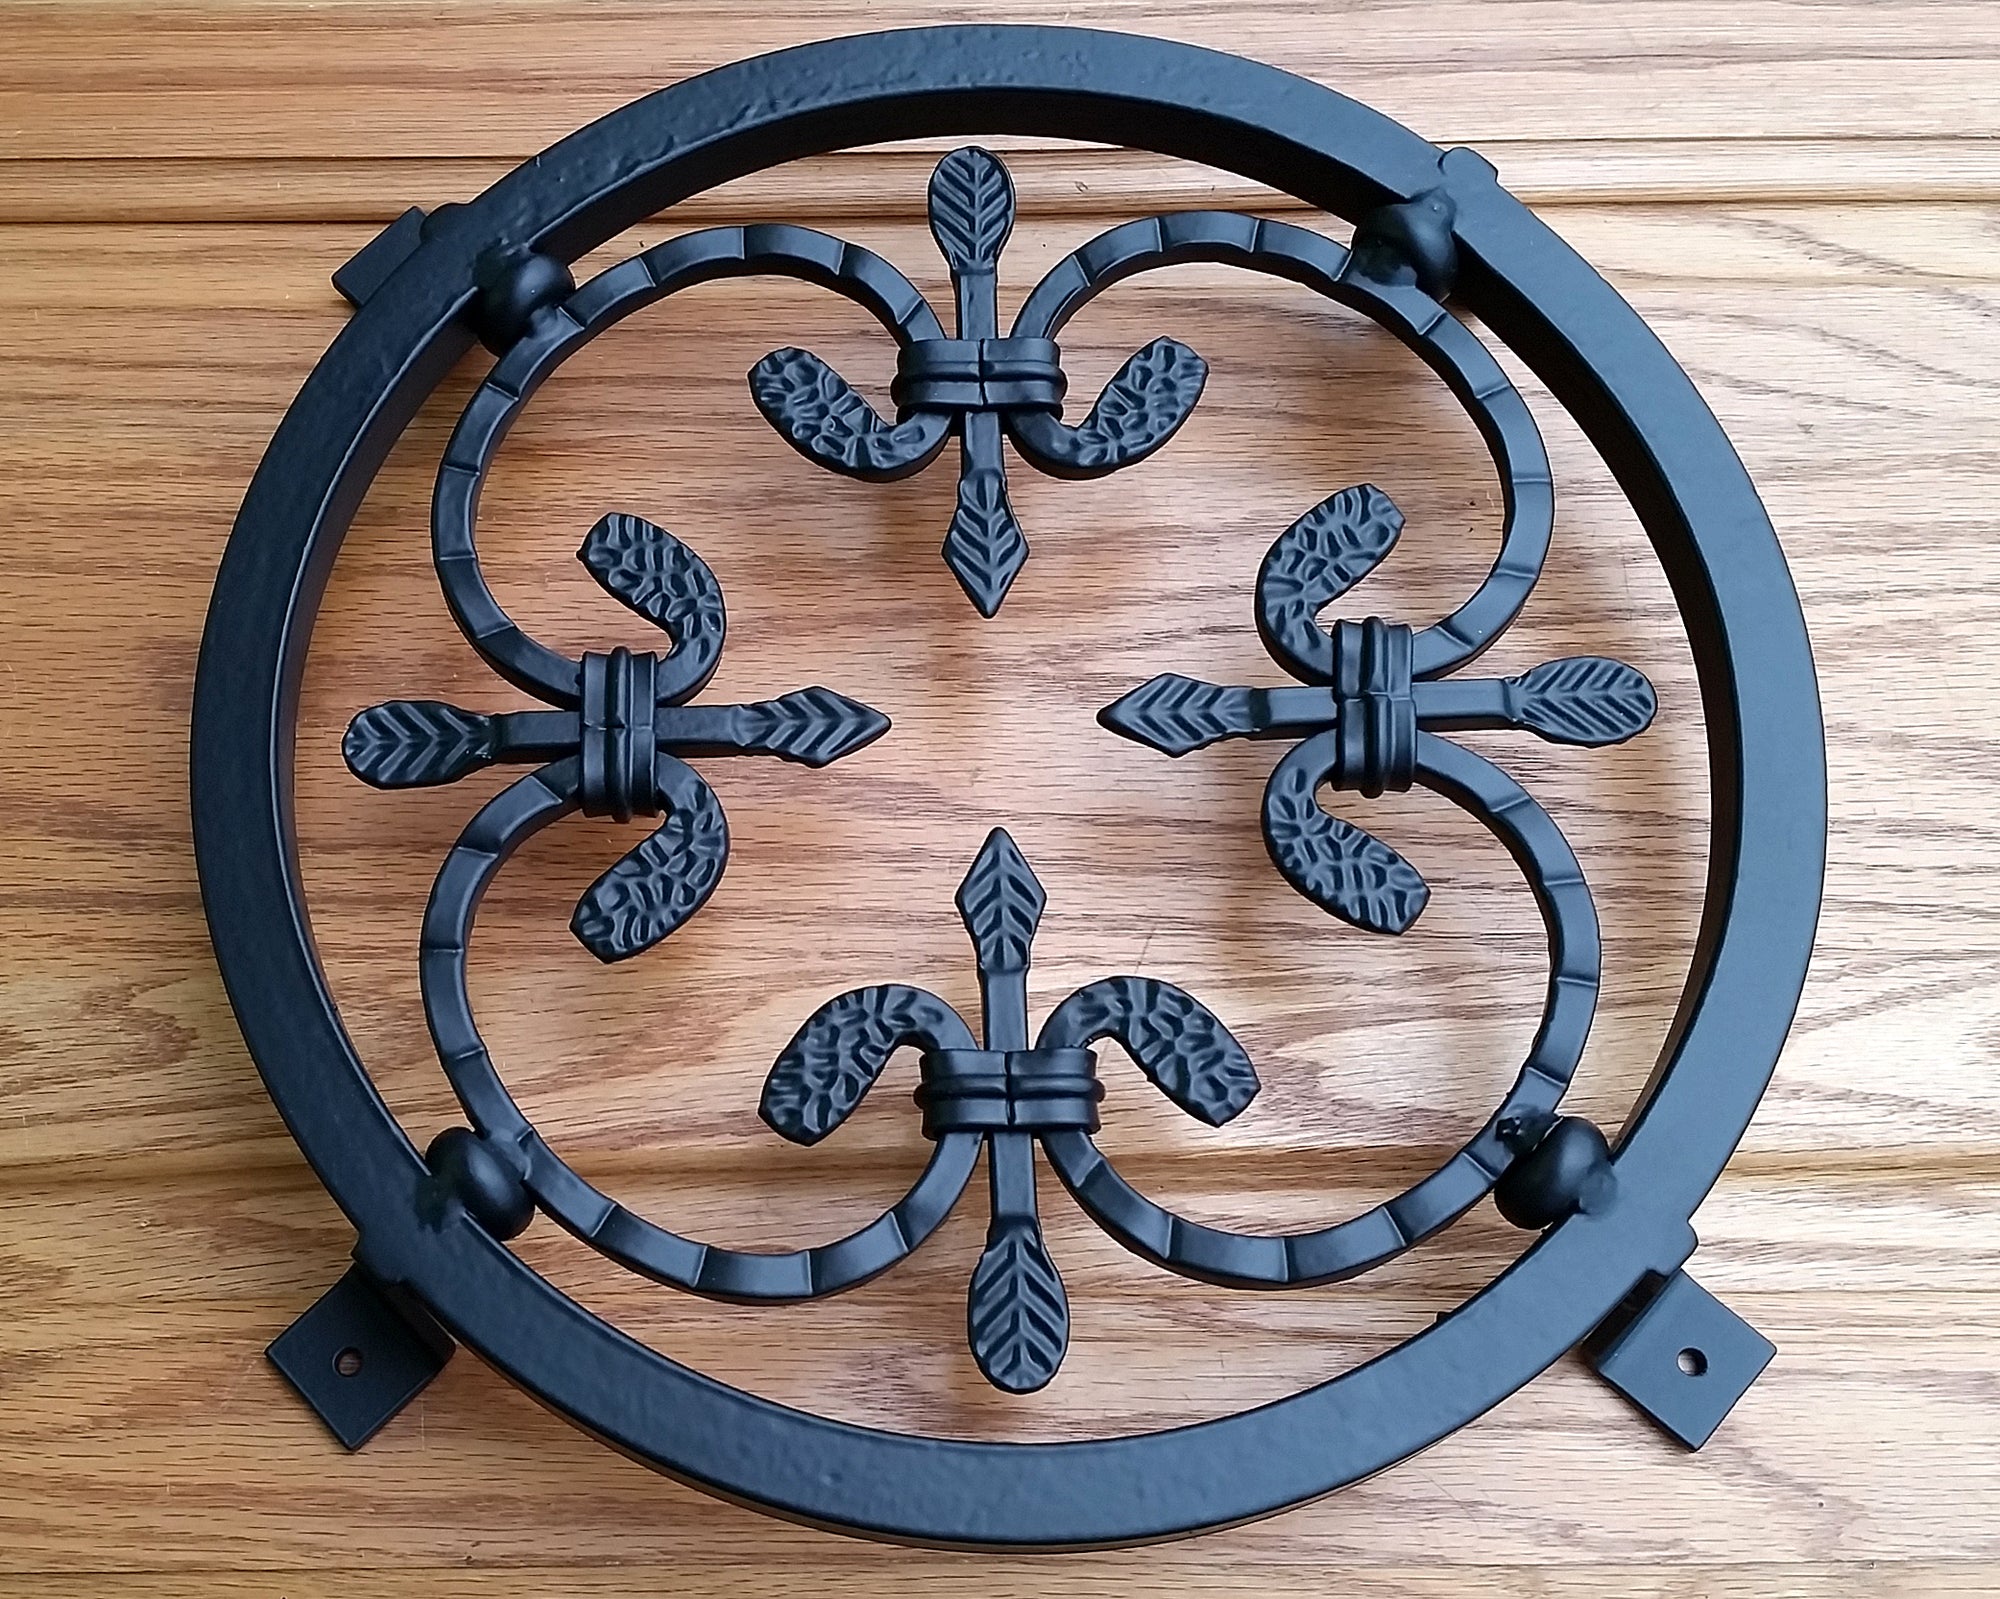 Forged Steel Grille / Window Grille / with inset decorative spear type rosette - Wild West Hardware